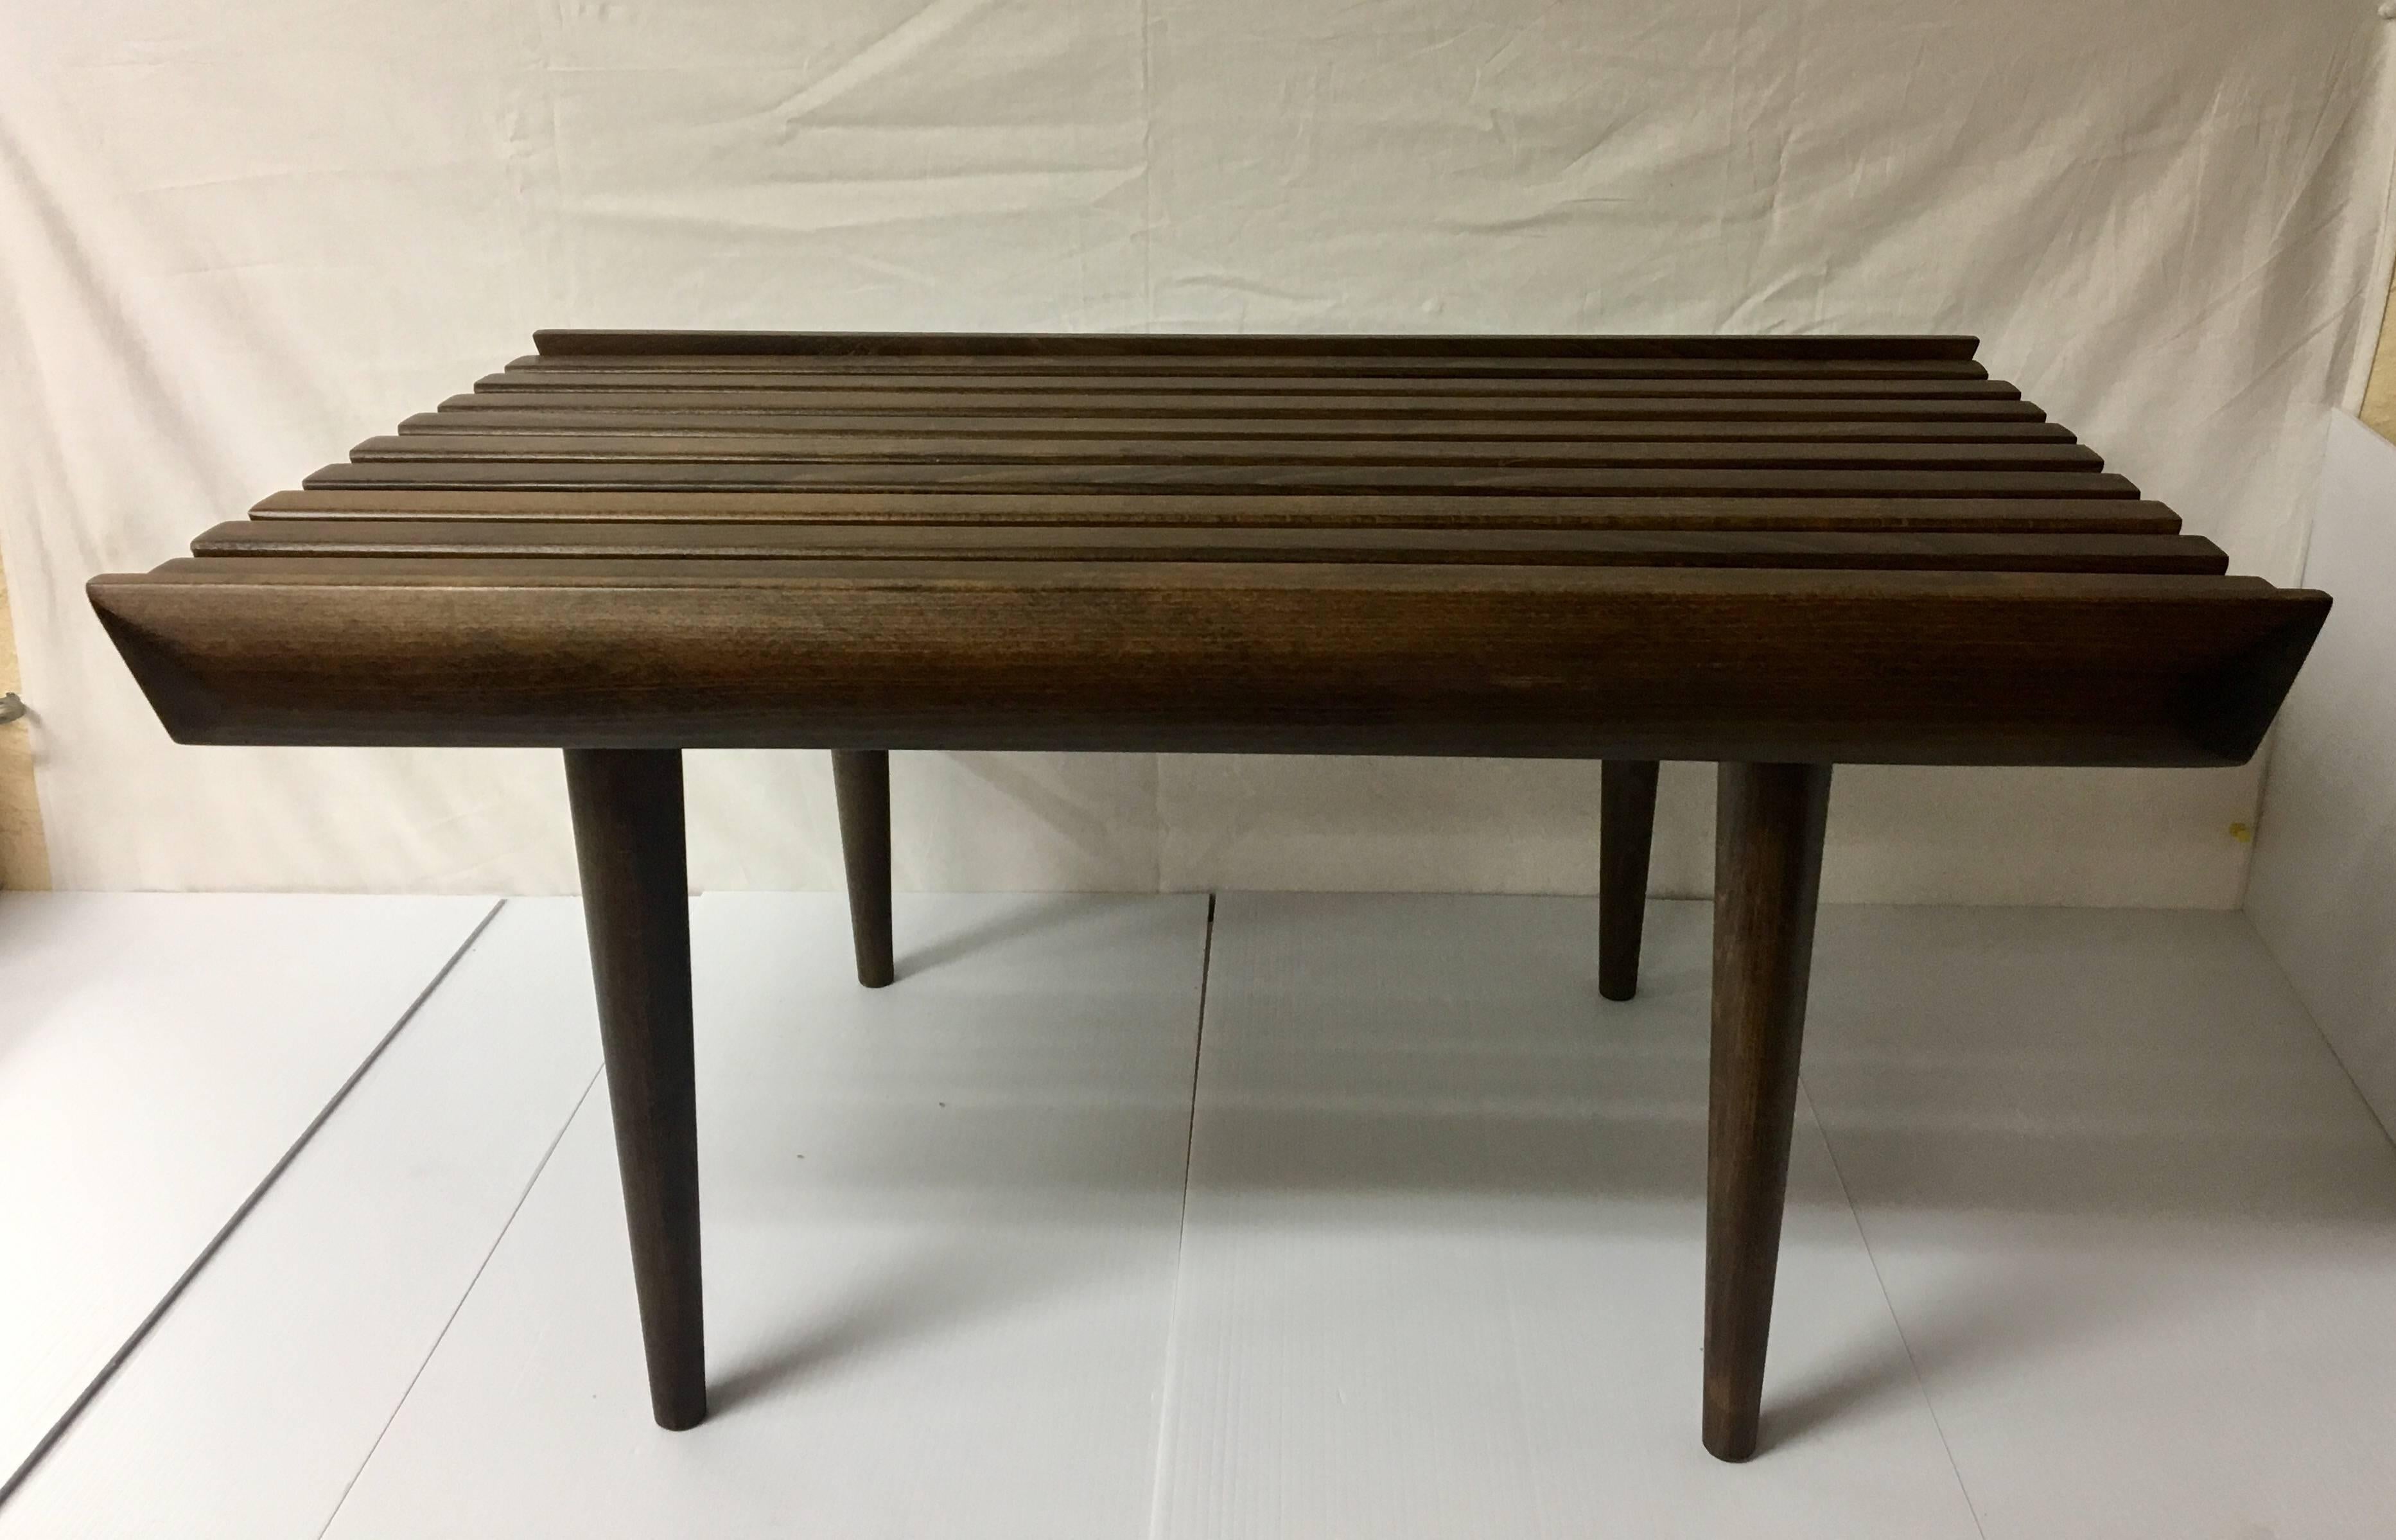 Macedonian Mid-Century Solid Wood Small Platform Slat Bench or Coffee Table